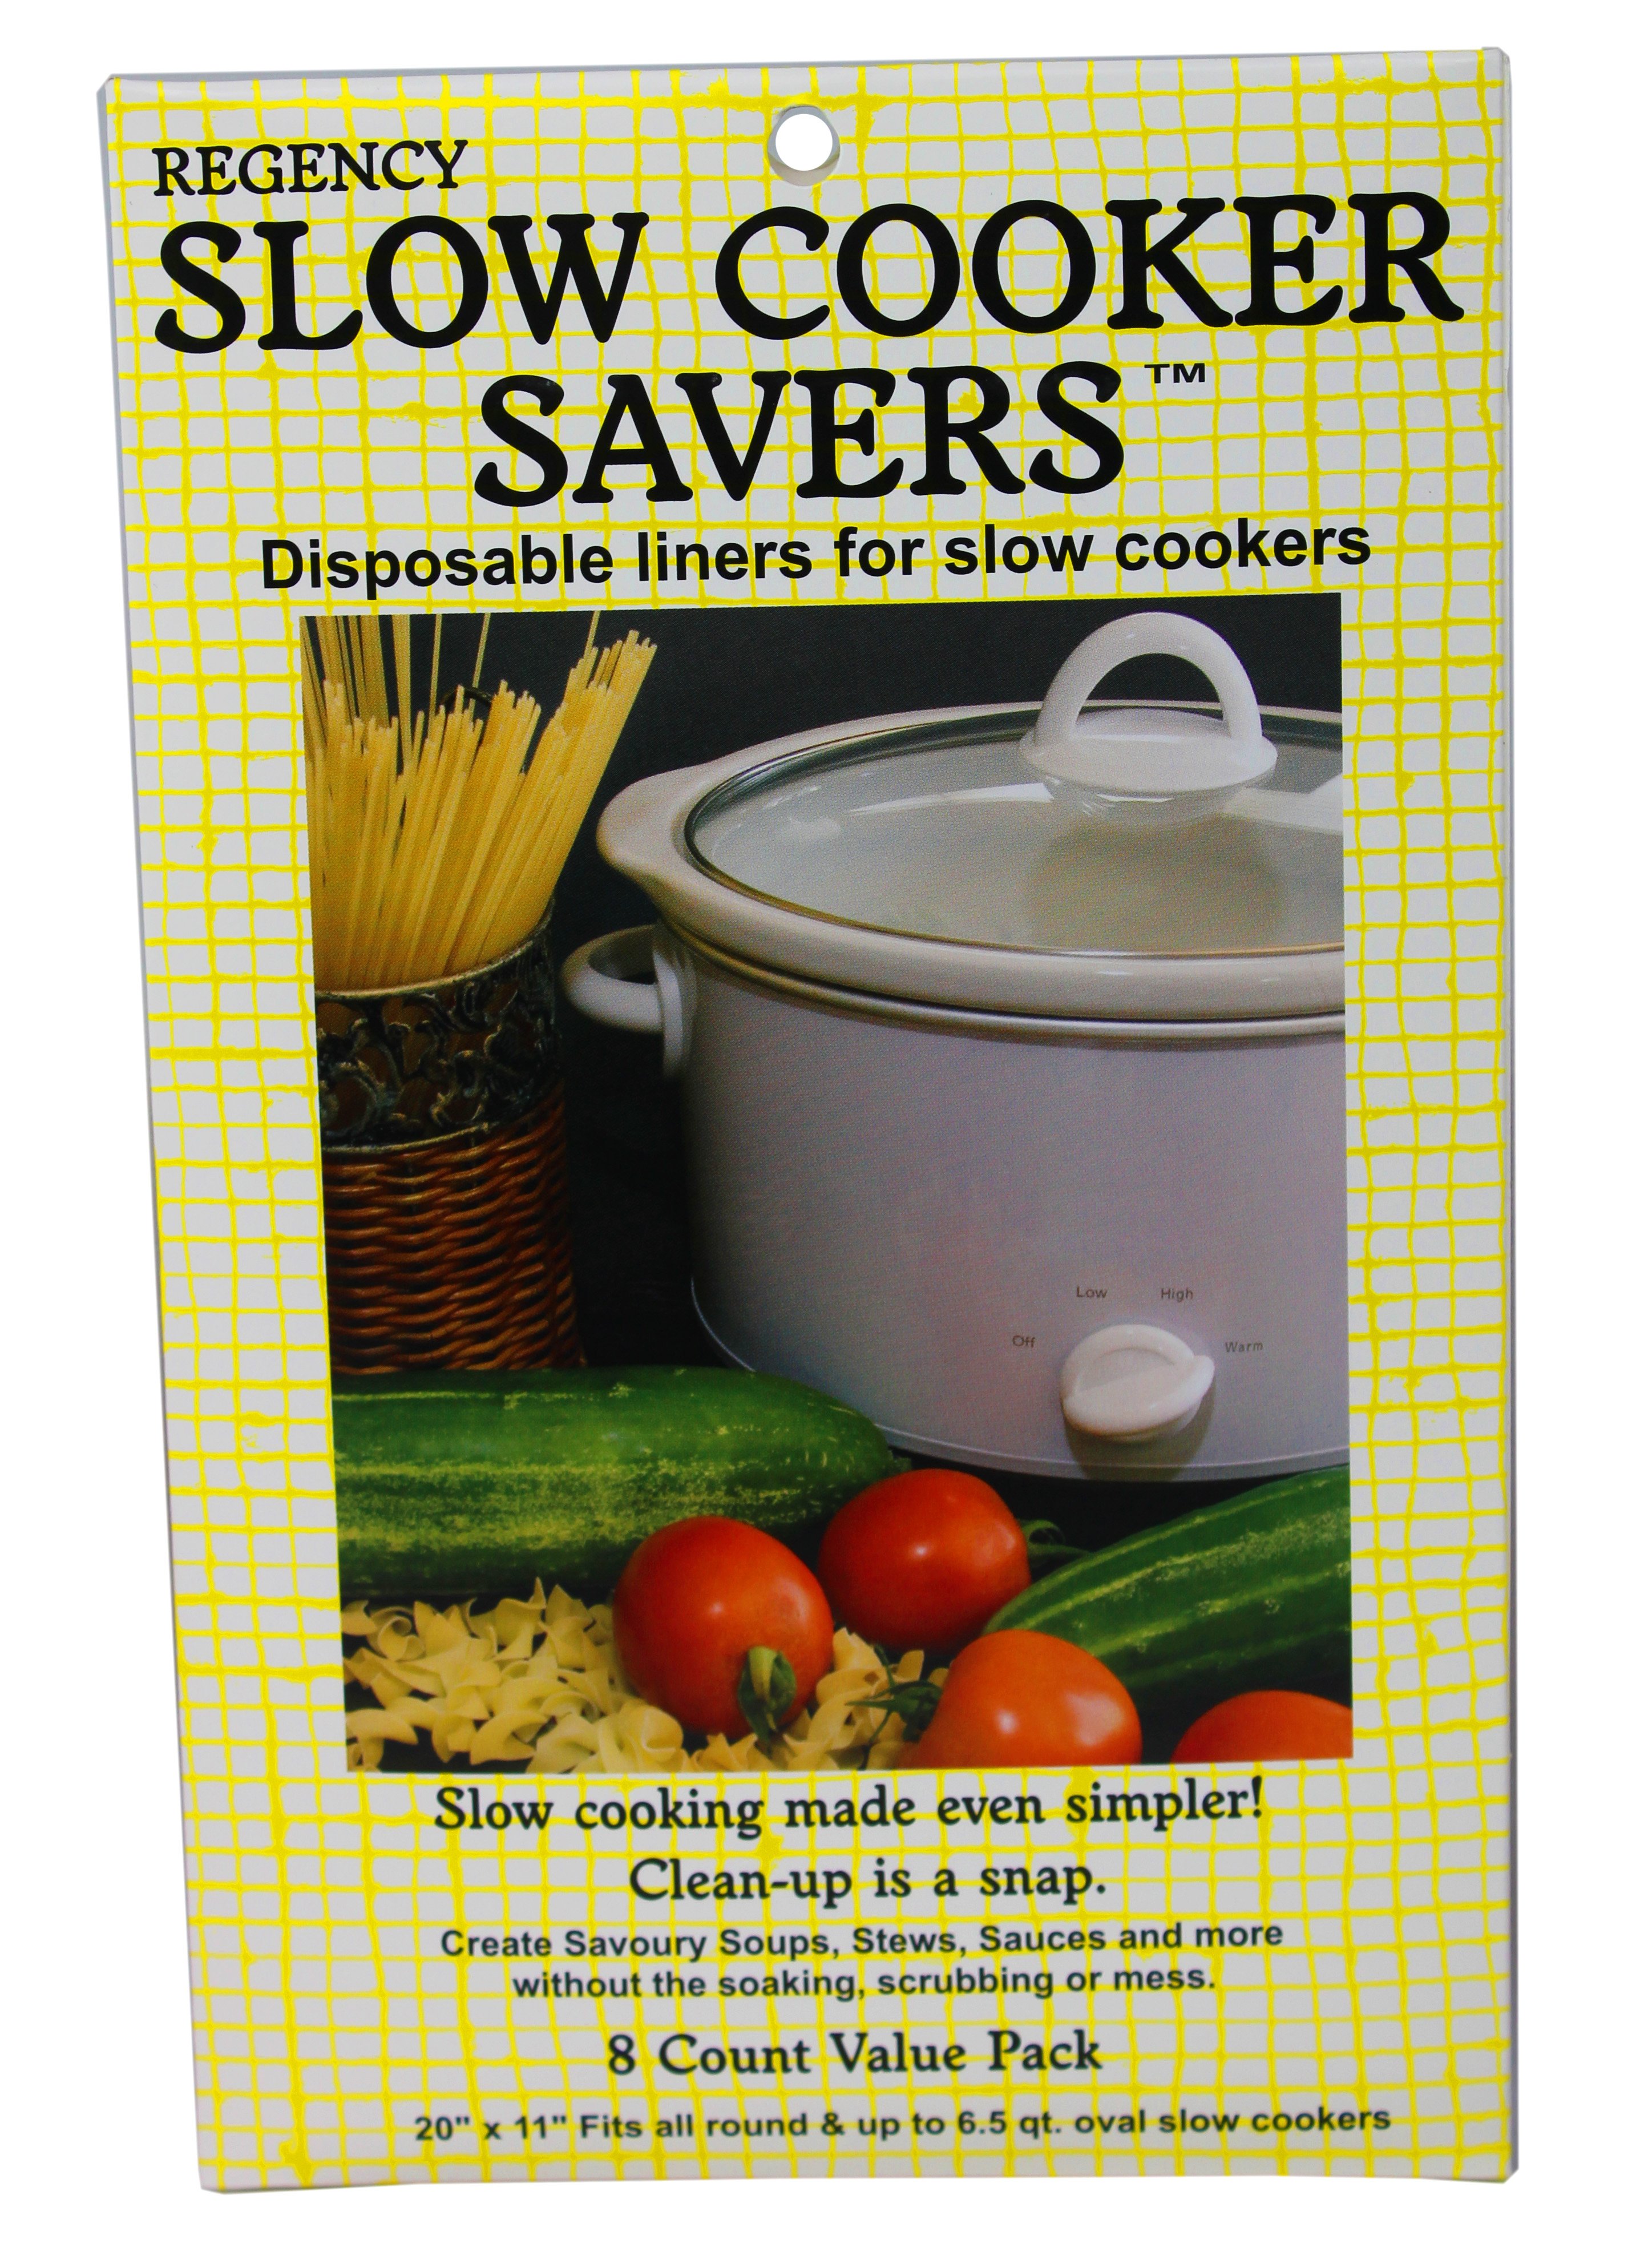 Disposable Slow Cooker Liners - 20 Pack